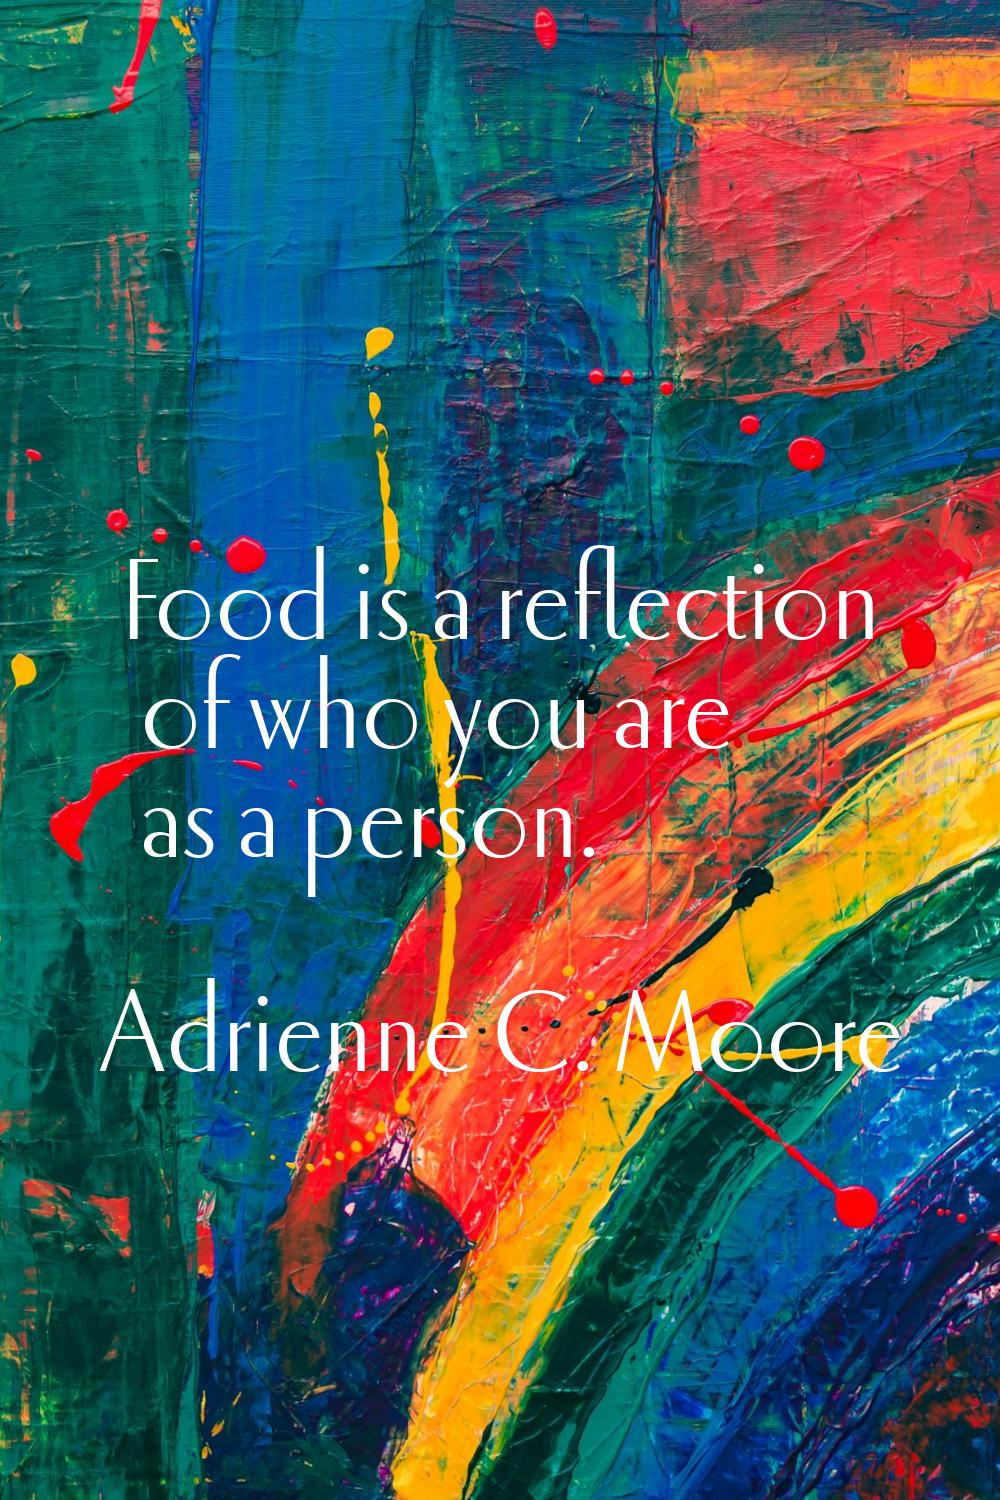 Food is a reflection of who you are as a person.